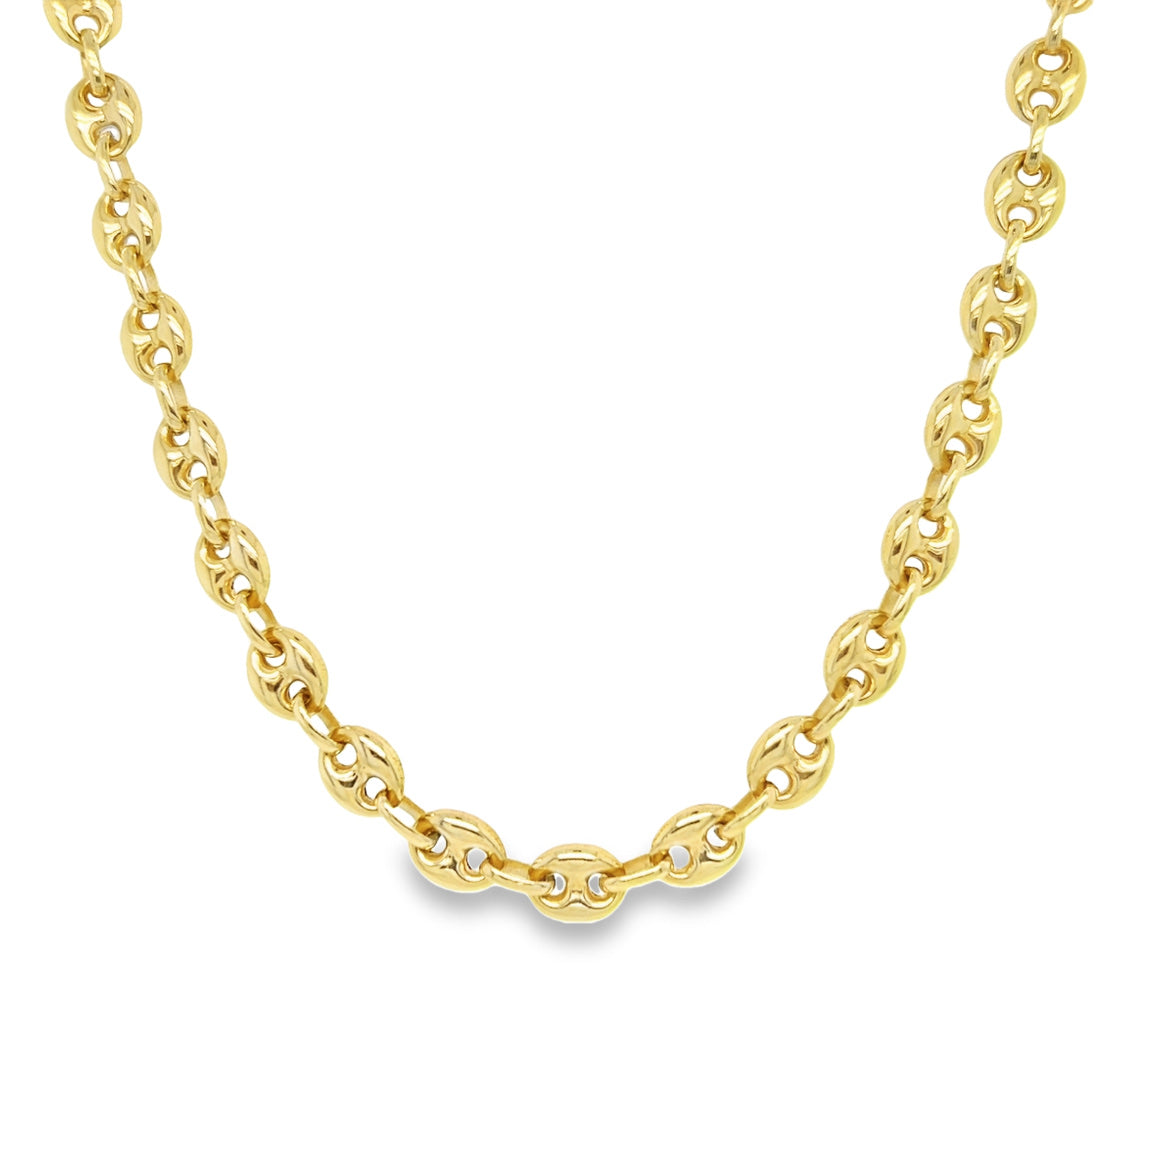 The Mainstay XL Necklace - Reversible